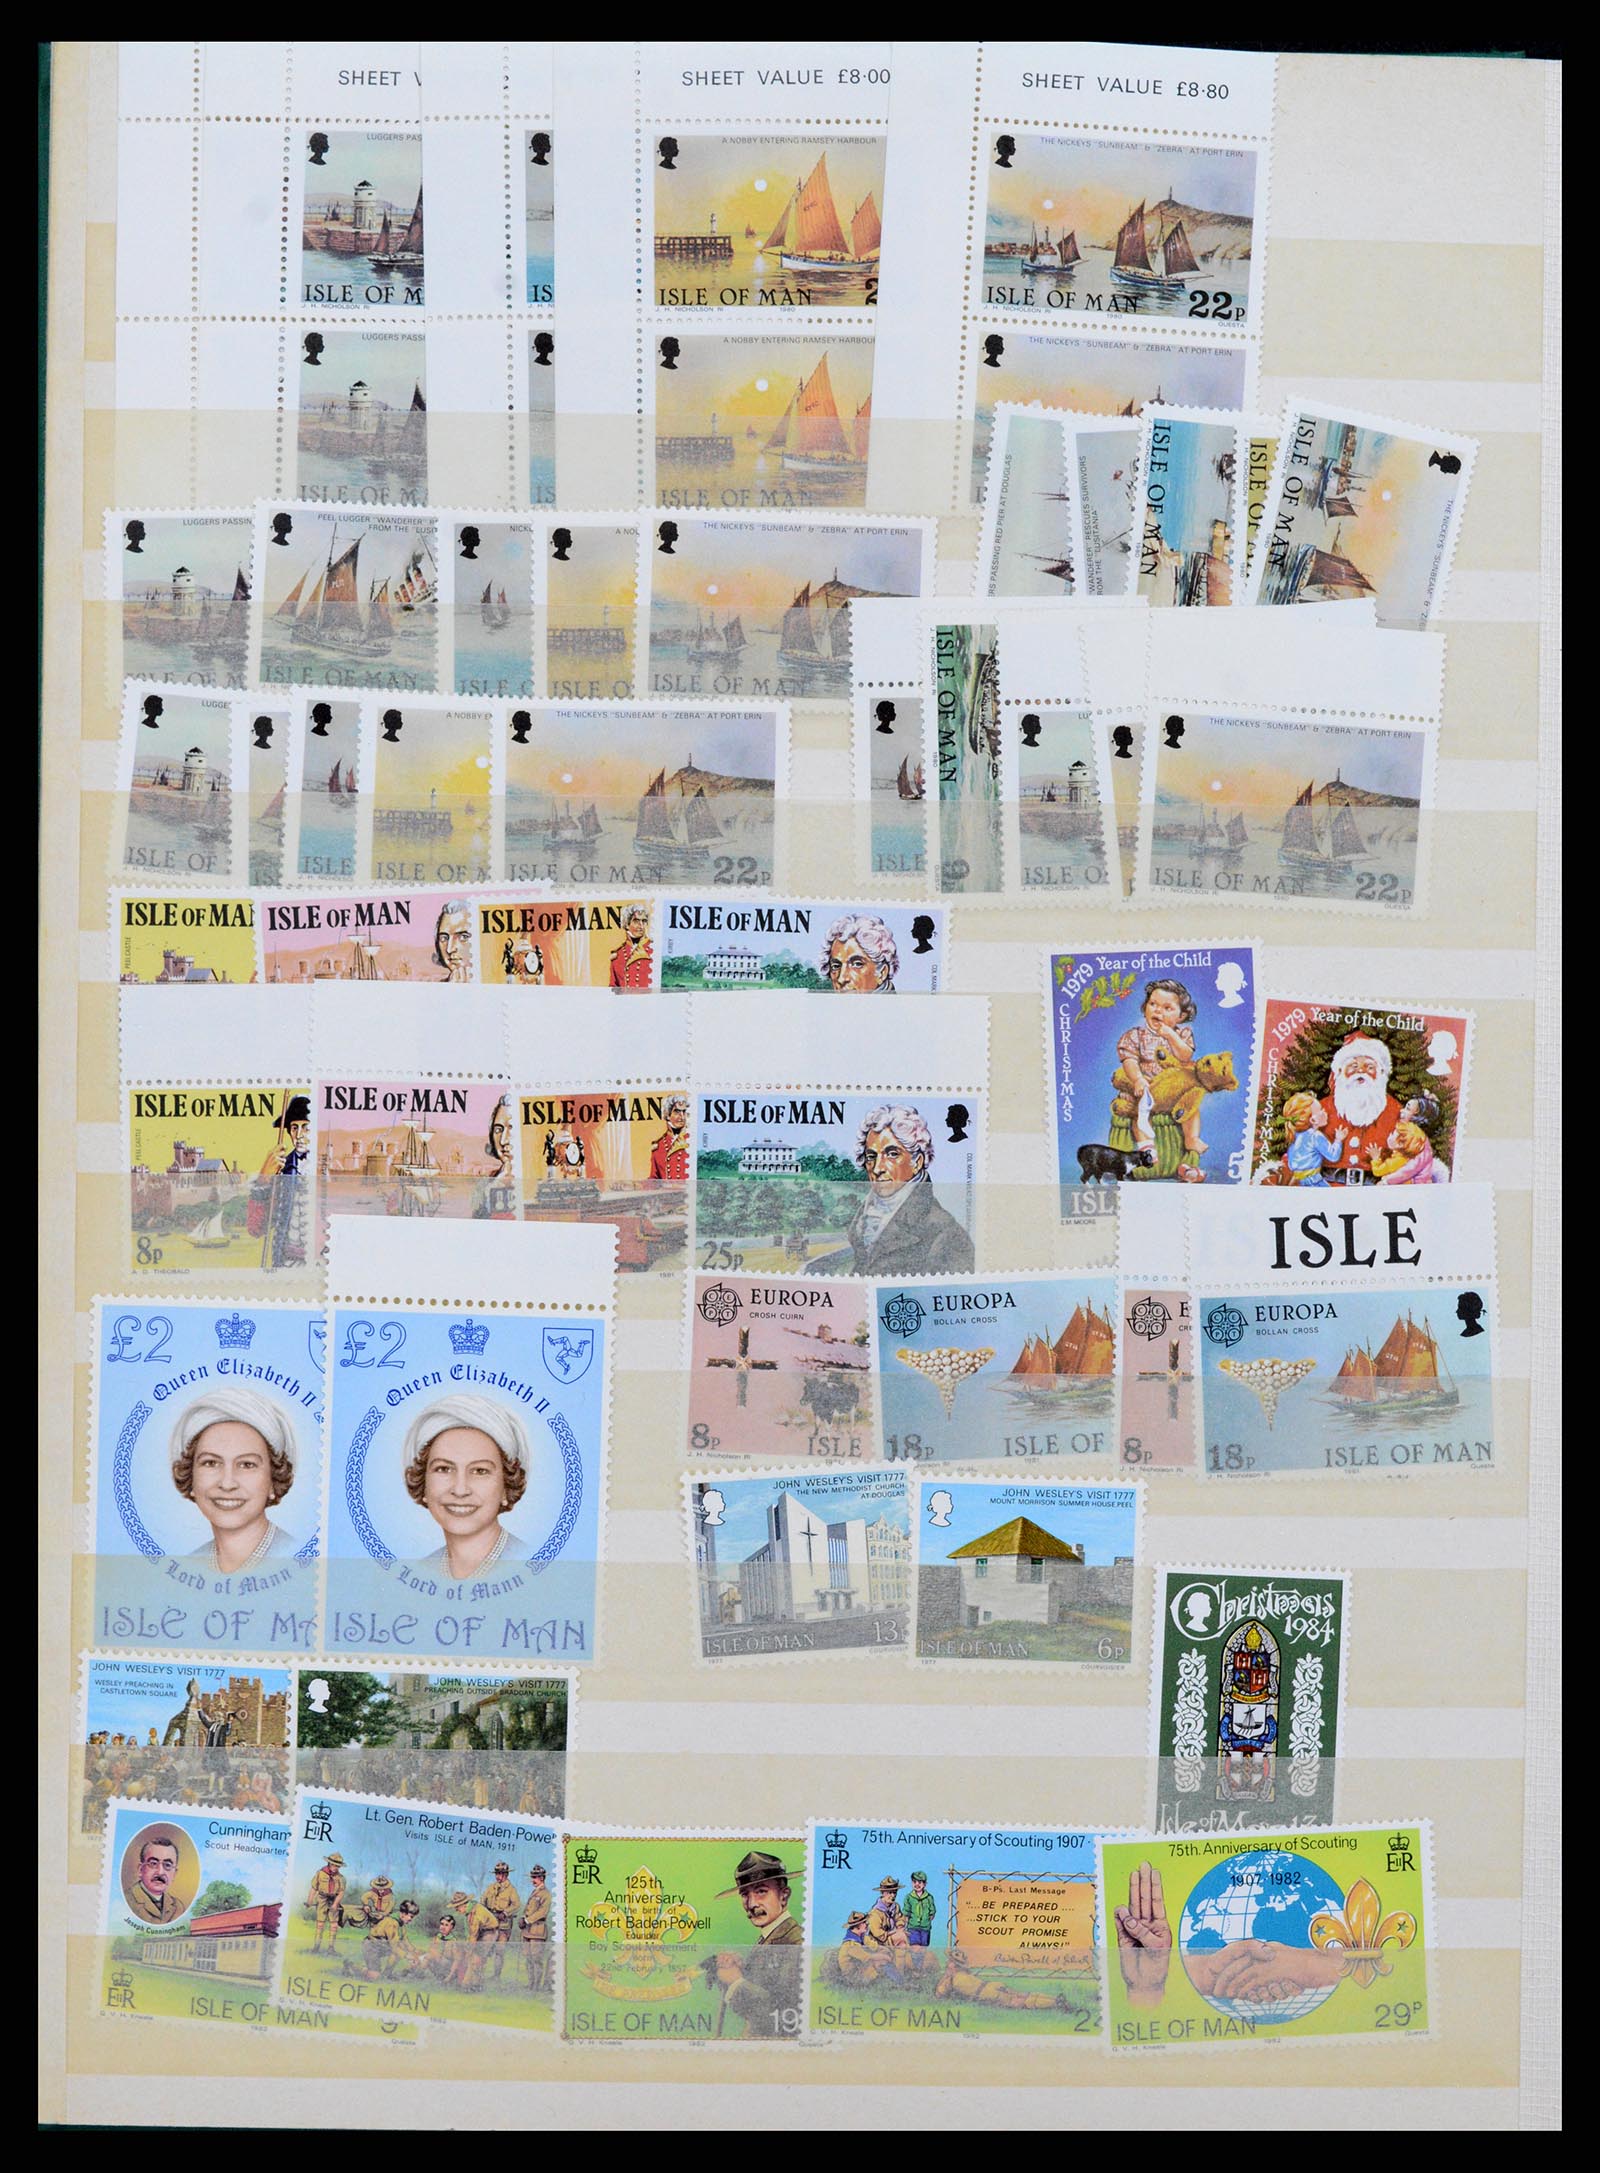 37364 020 - Stamp collection 37364 Channel Islands 1940-1980 and Great Britain 1880-